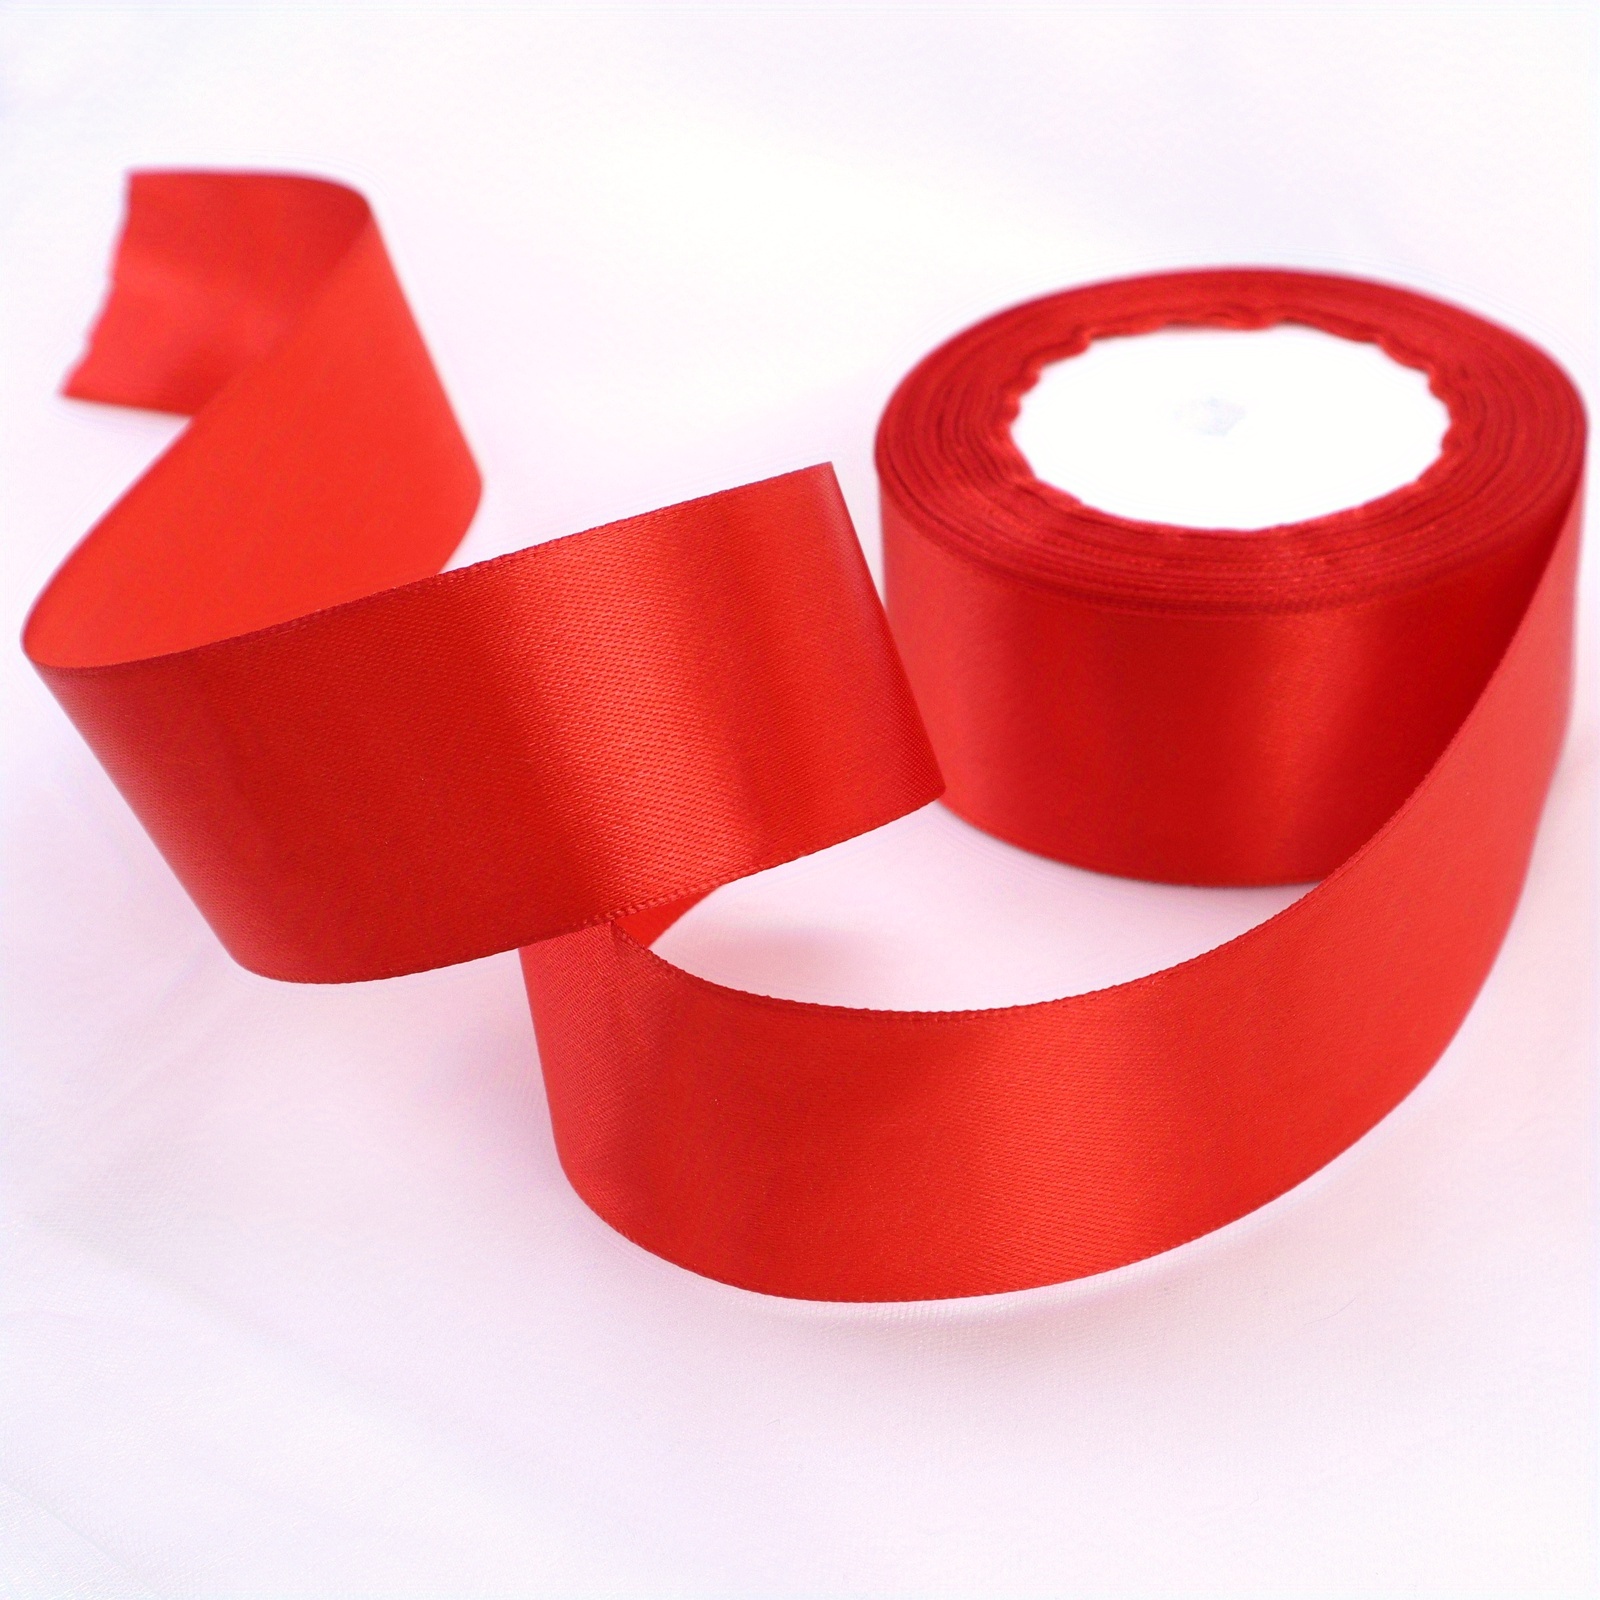 Red Satin Ribbon 1 Inch 50 Yard Roll for Gift Wrapping, Weddings, Hair –  MudraCrafts